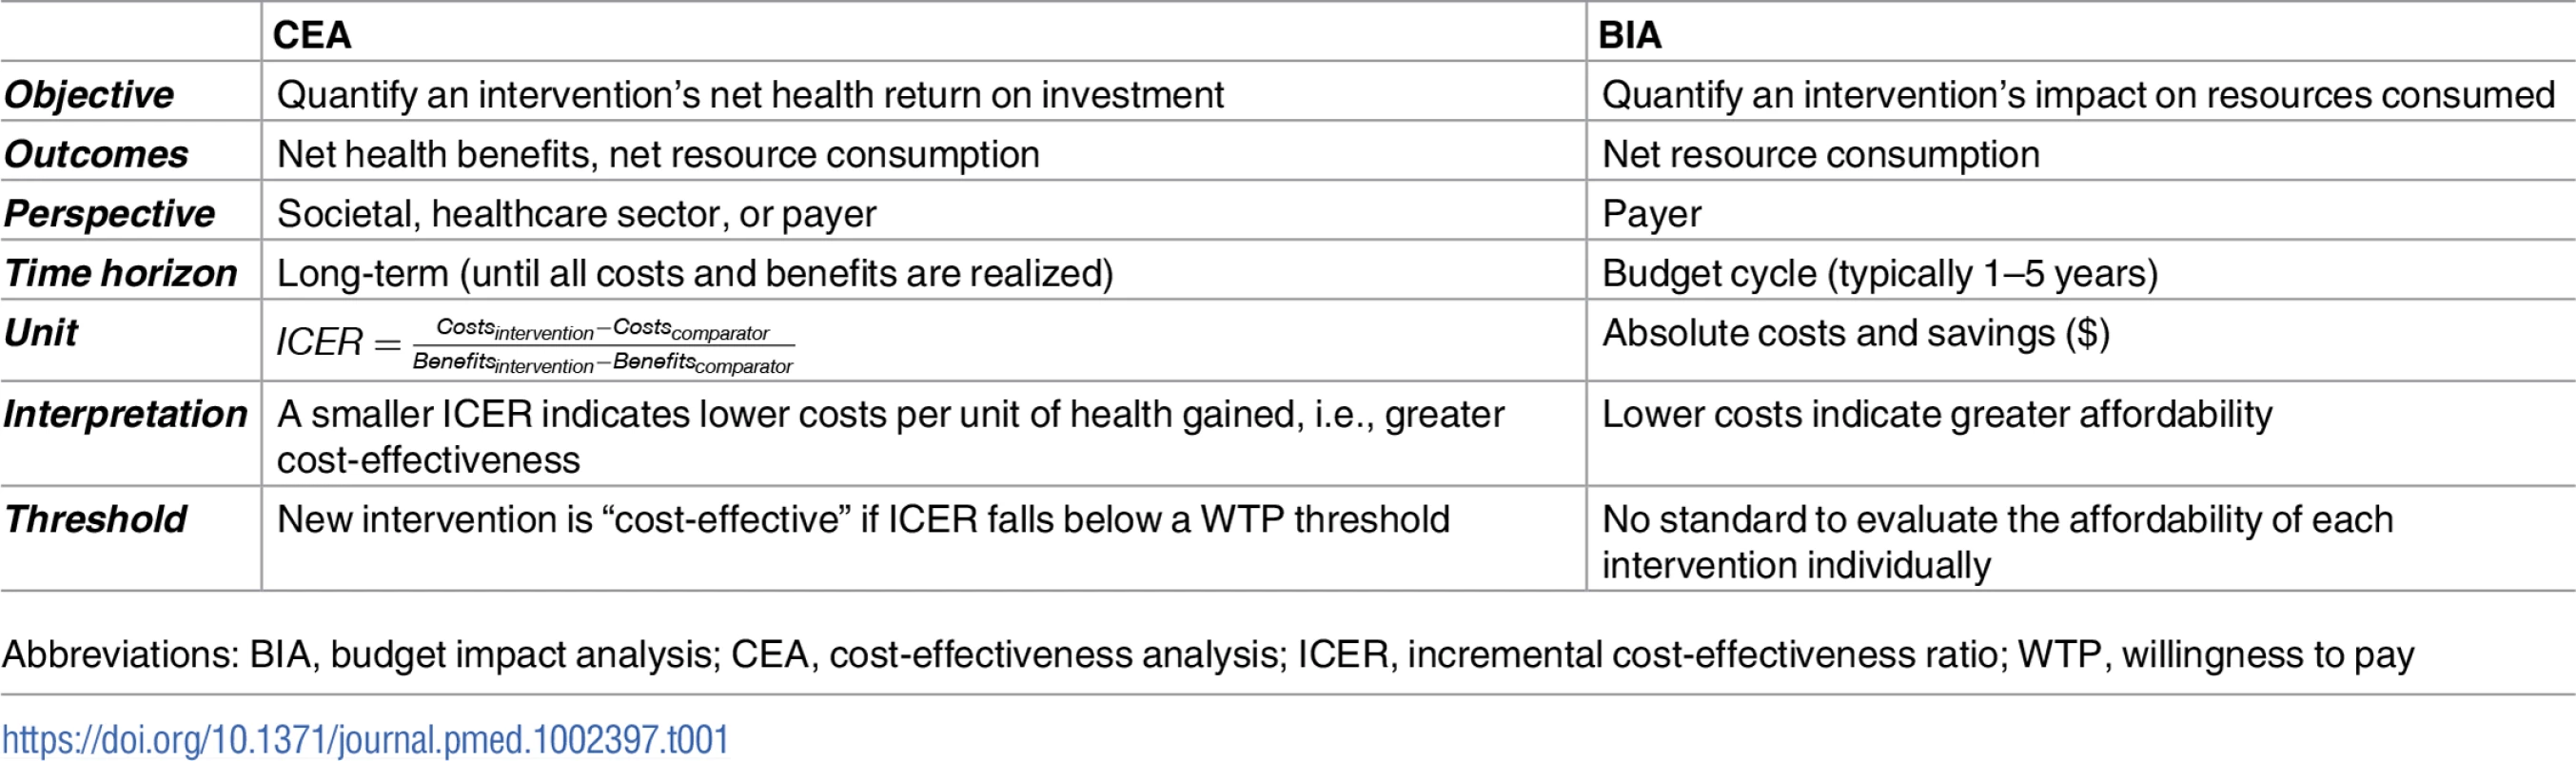 Comparison of CEA and BIA.